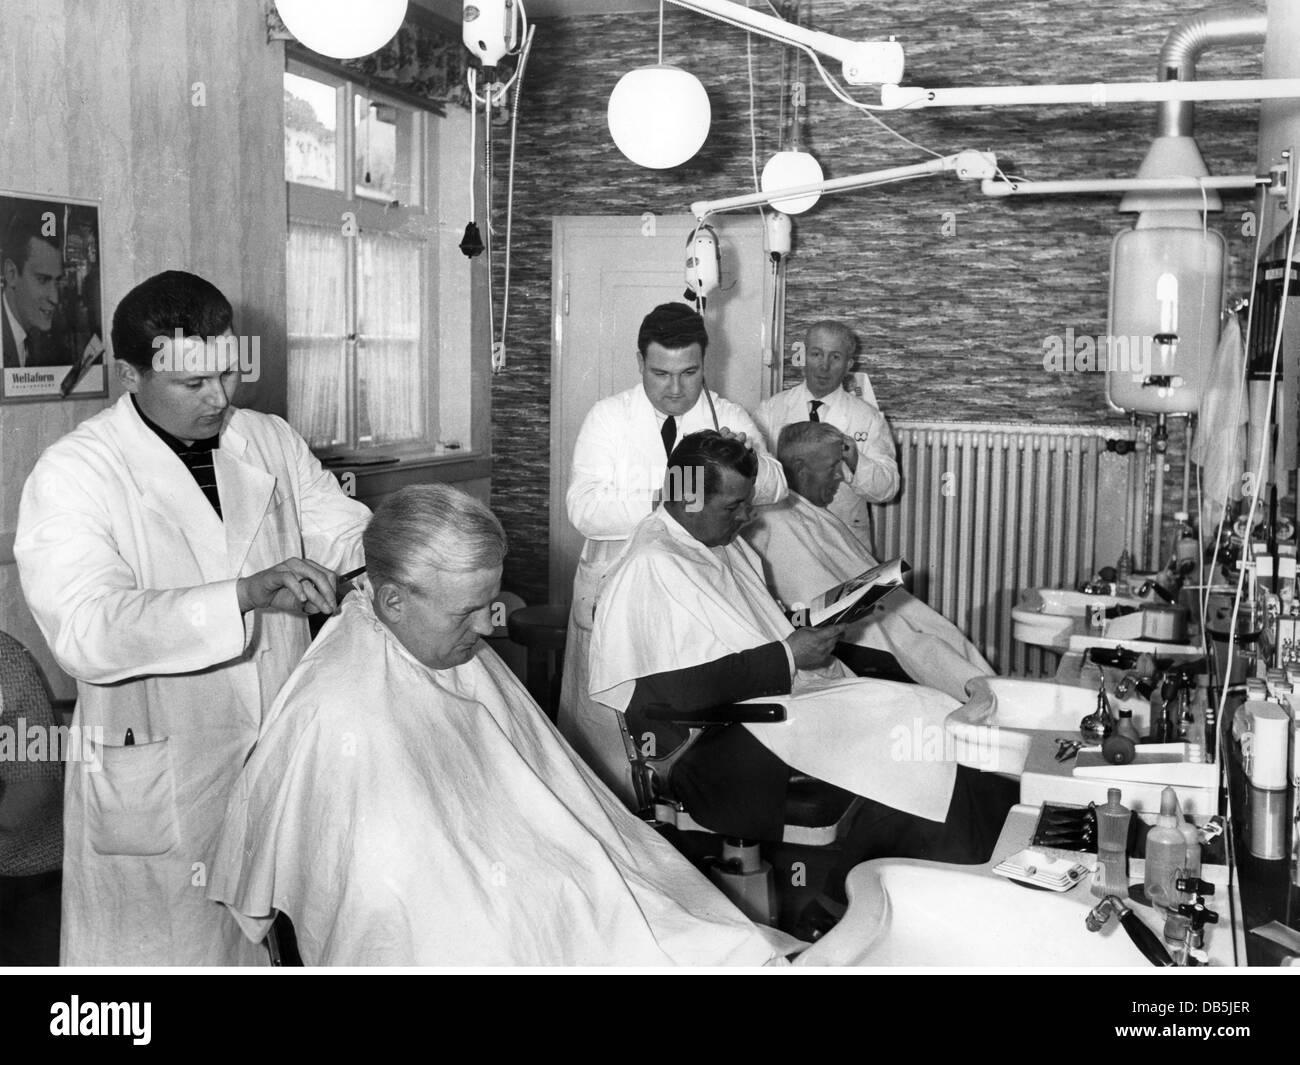 people, professions, barber, barber shop, West Germany, 1950s, , Additional-Rights-Clearences-Not Available Stock Photo